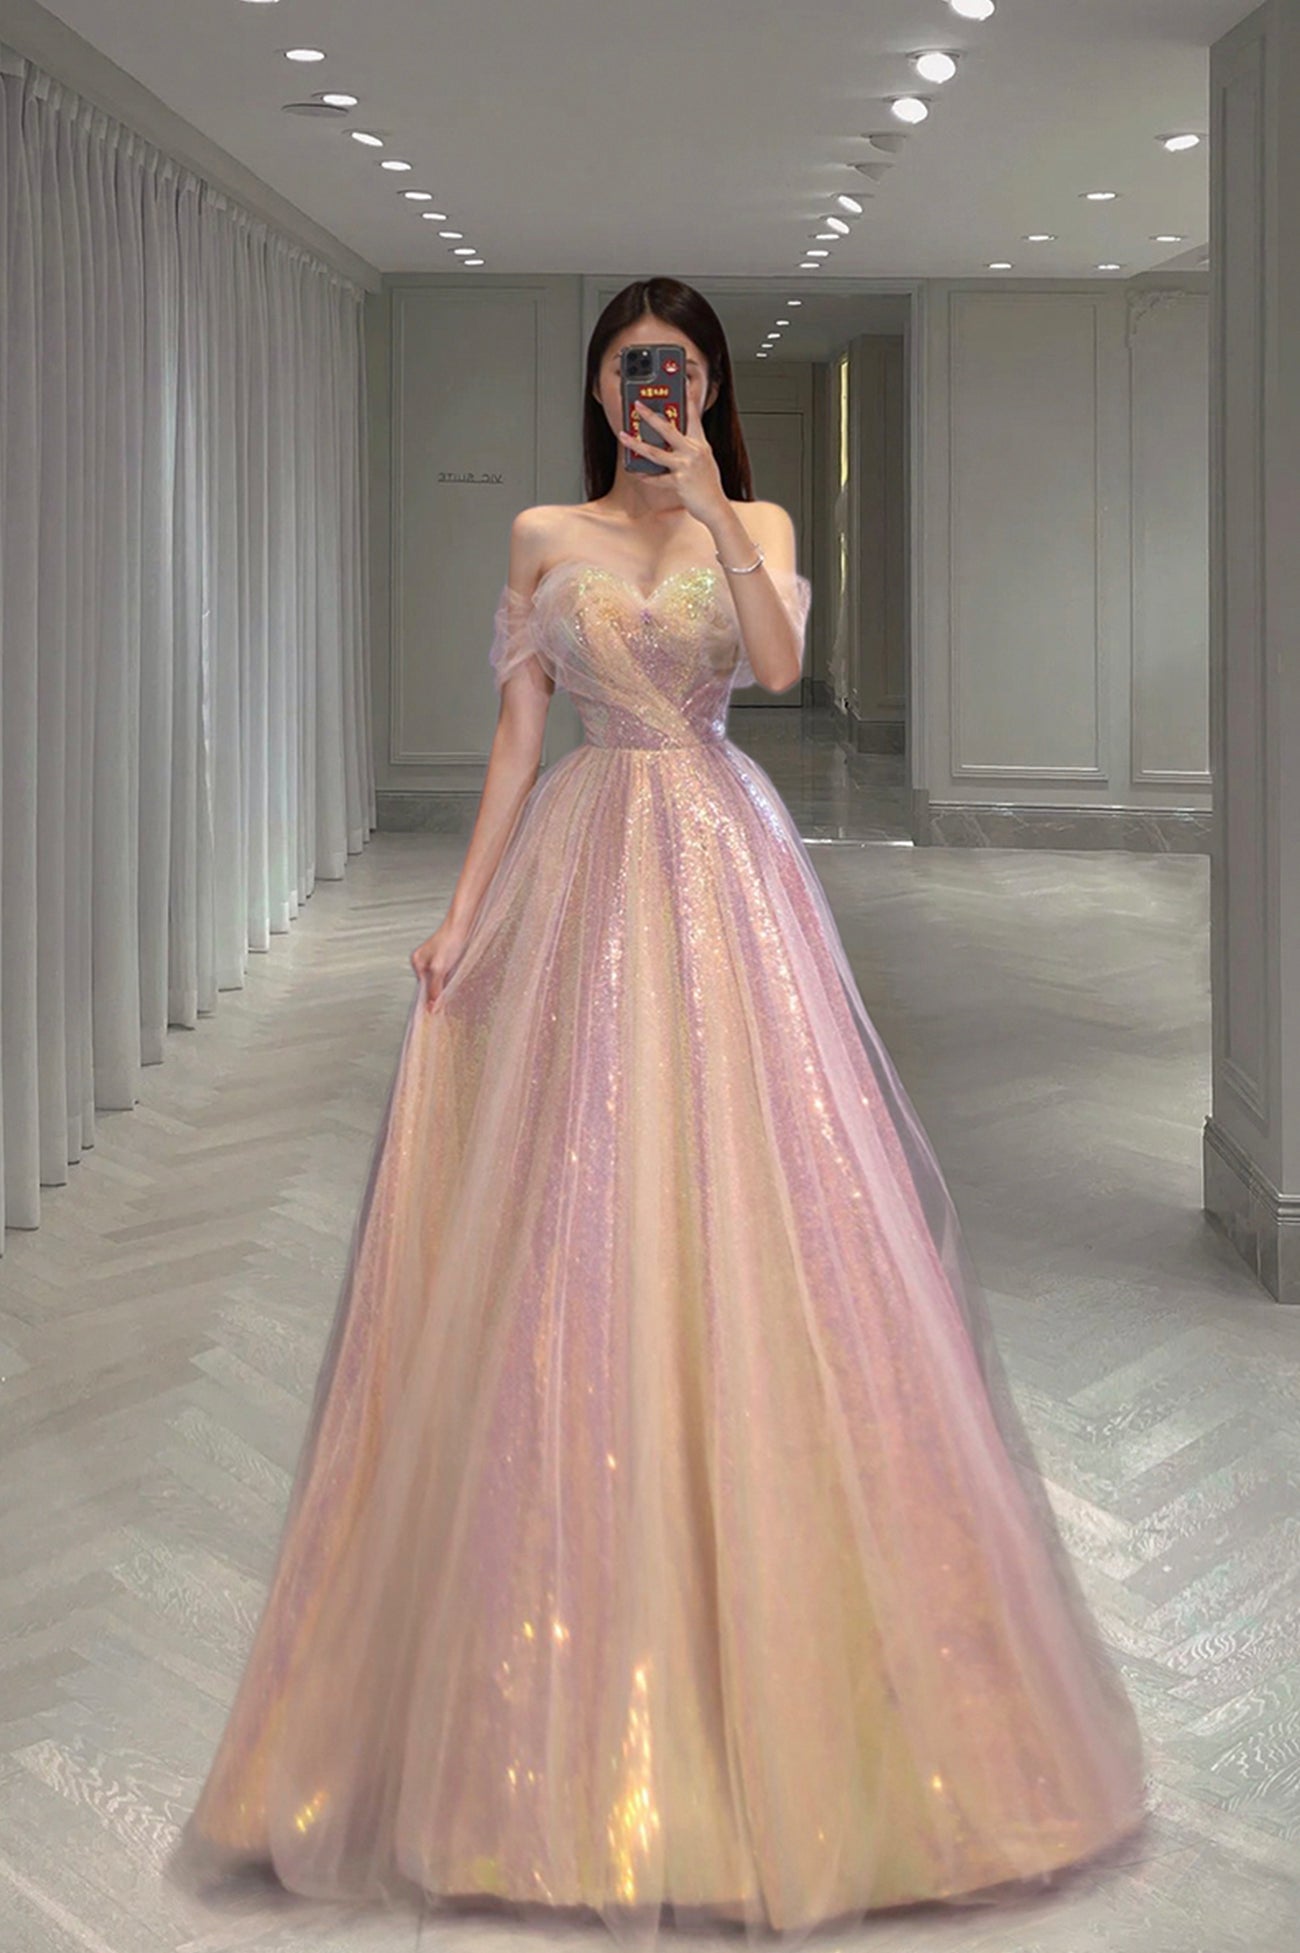 Shiny Tulle Long Prom Dress with Sequins, Off the Shoulder Evening Dress